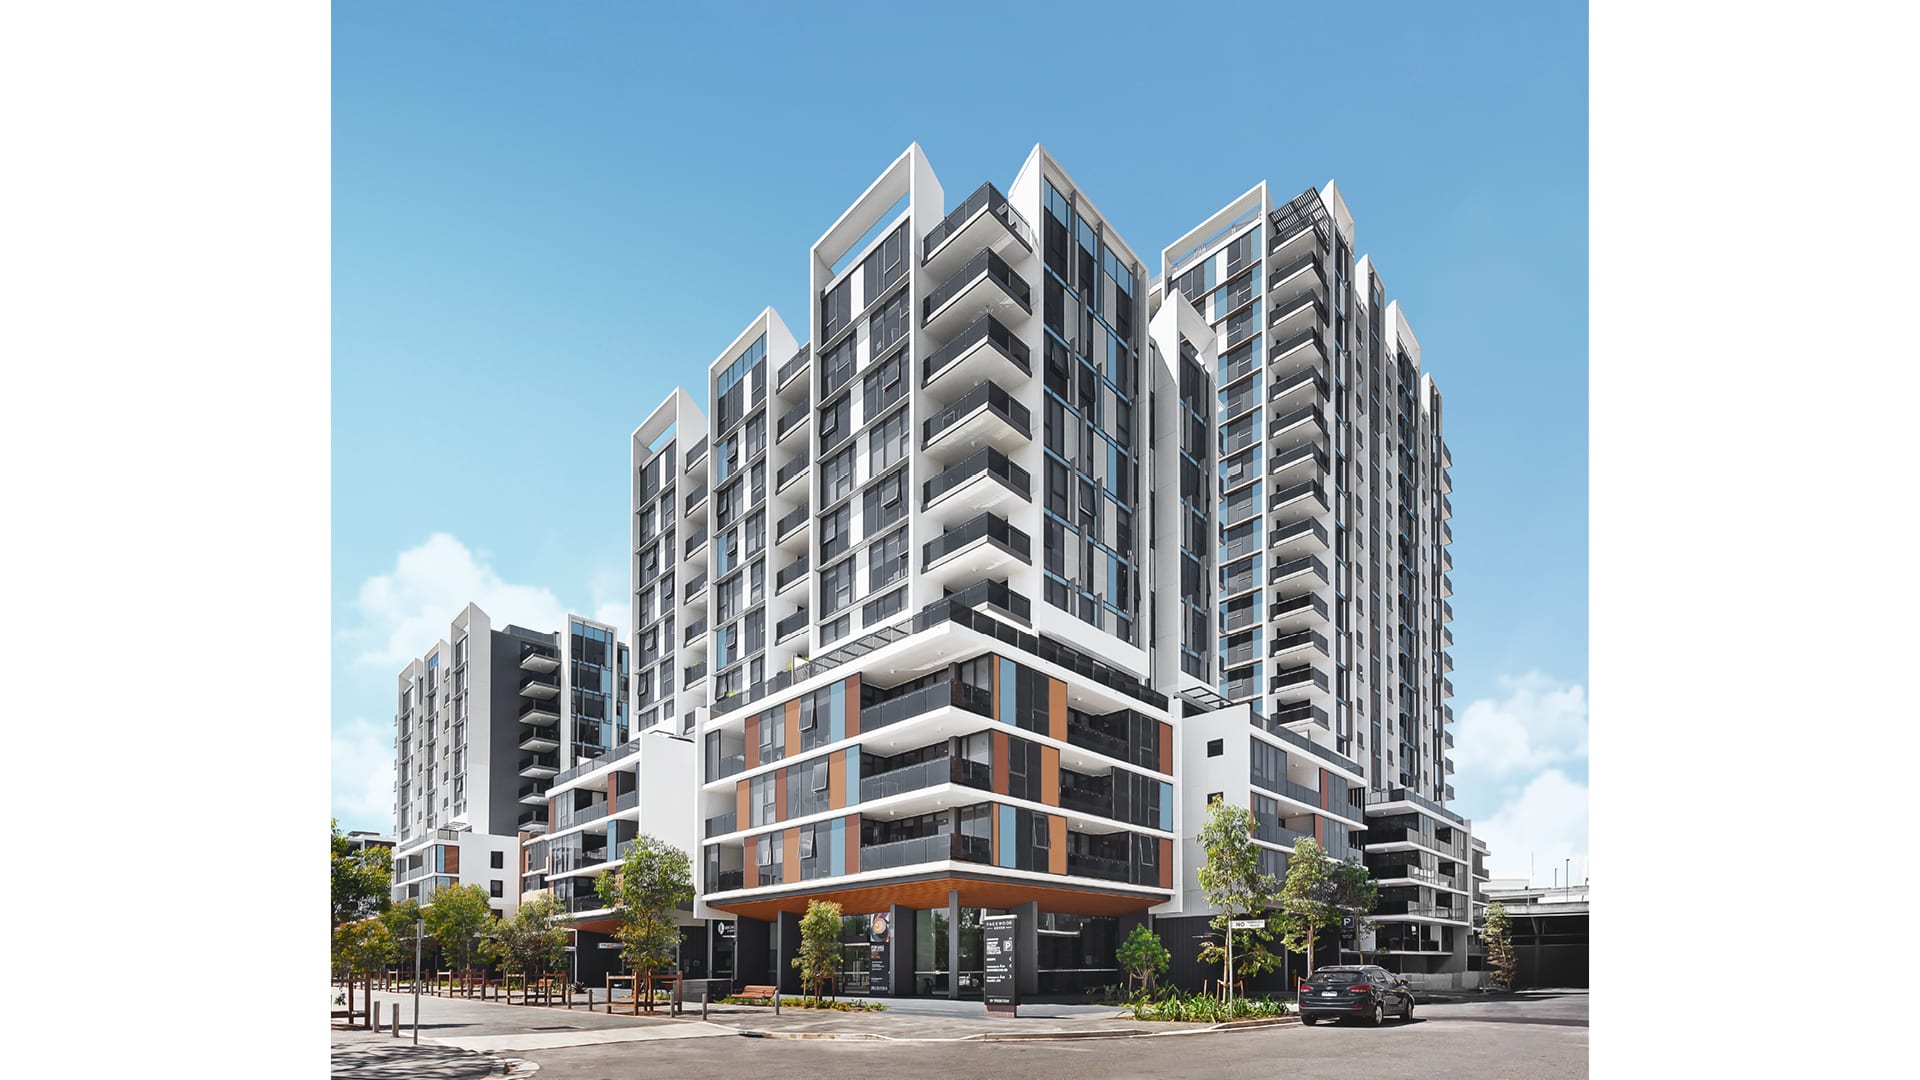 Five new two-bedroom apartments in and around Sydney’s Mascot